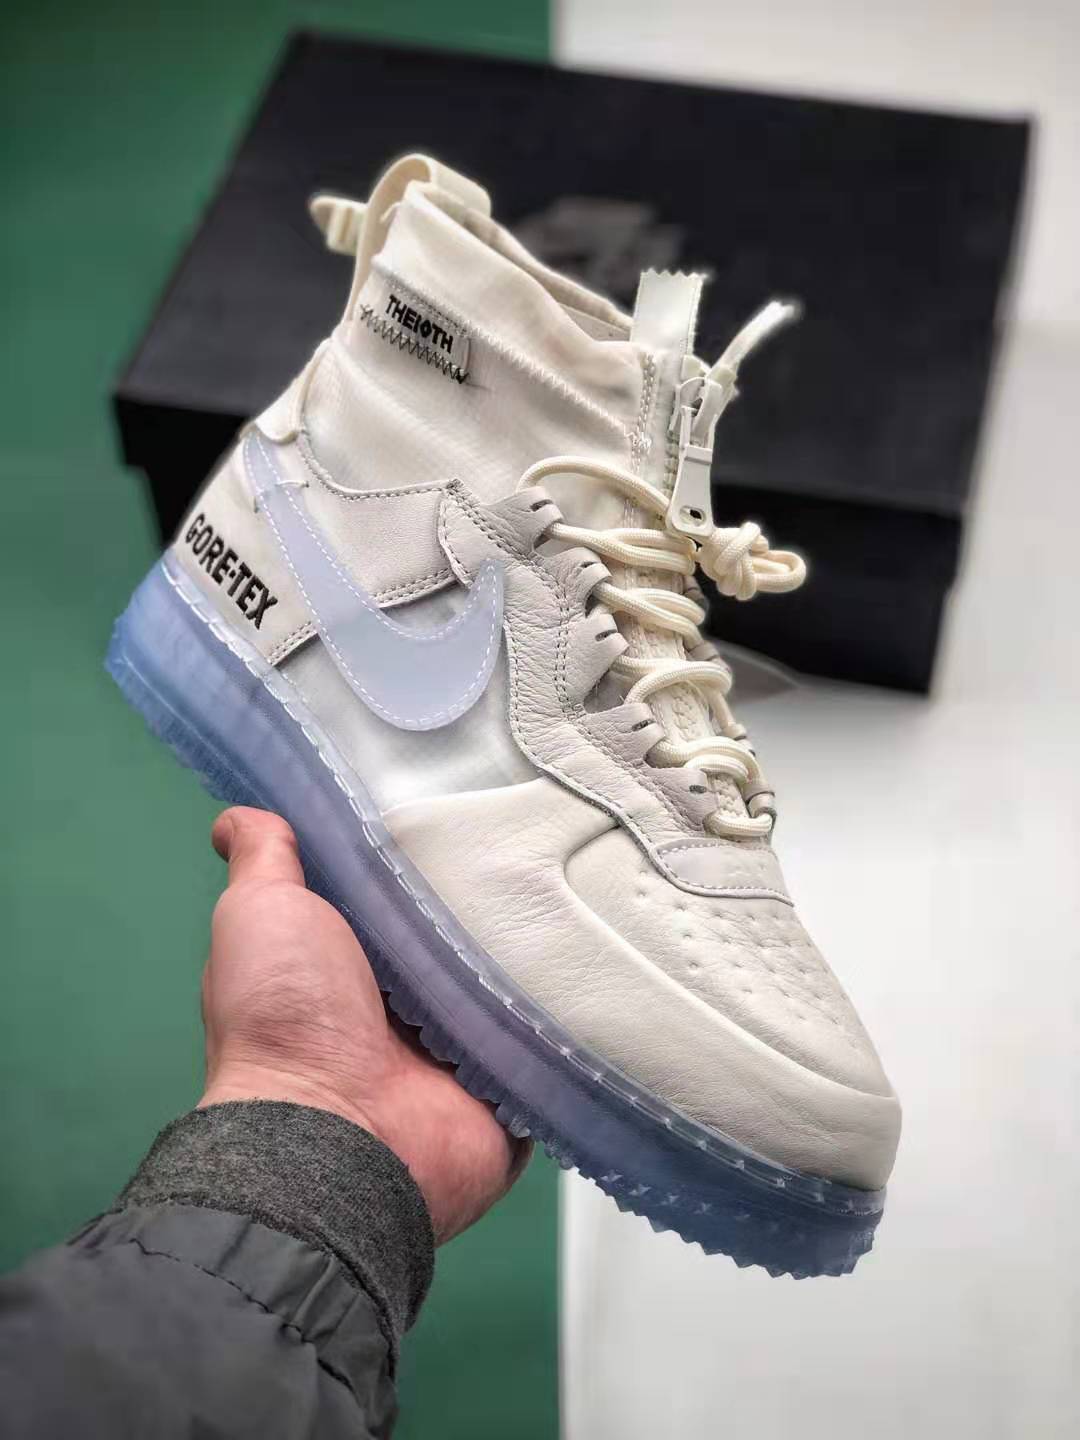 Nike Air Force 1 High Gore-Tex Phantom White CQ7211-002 - Waterproof Style for All-Day Comfort